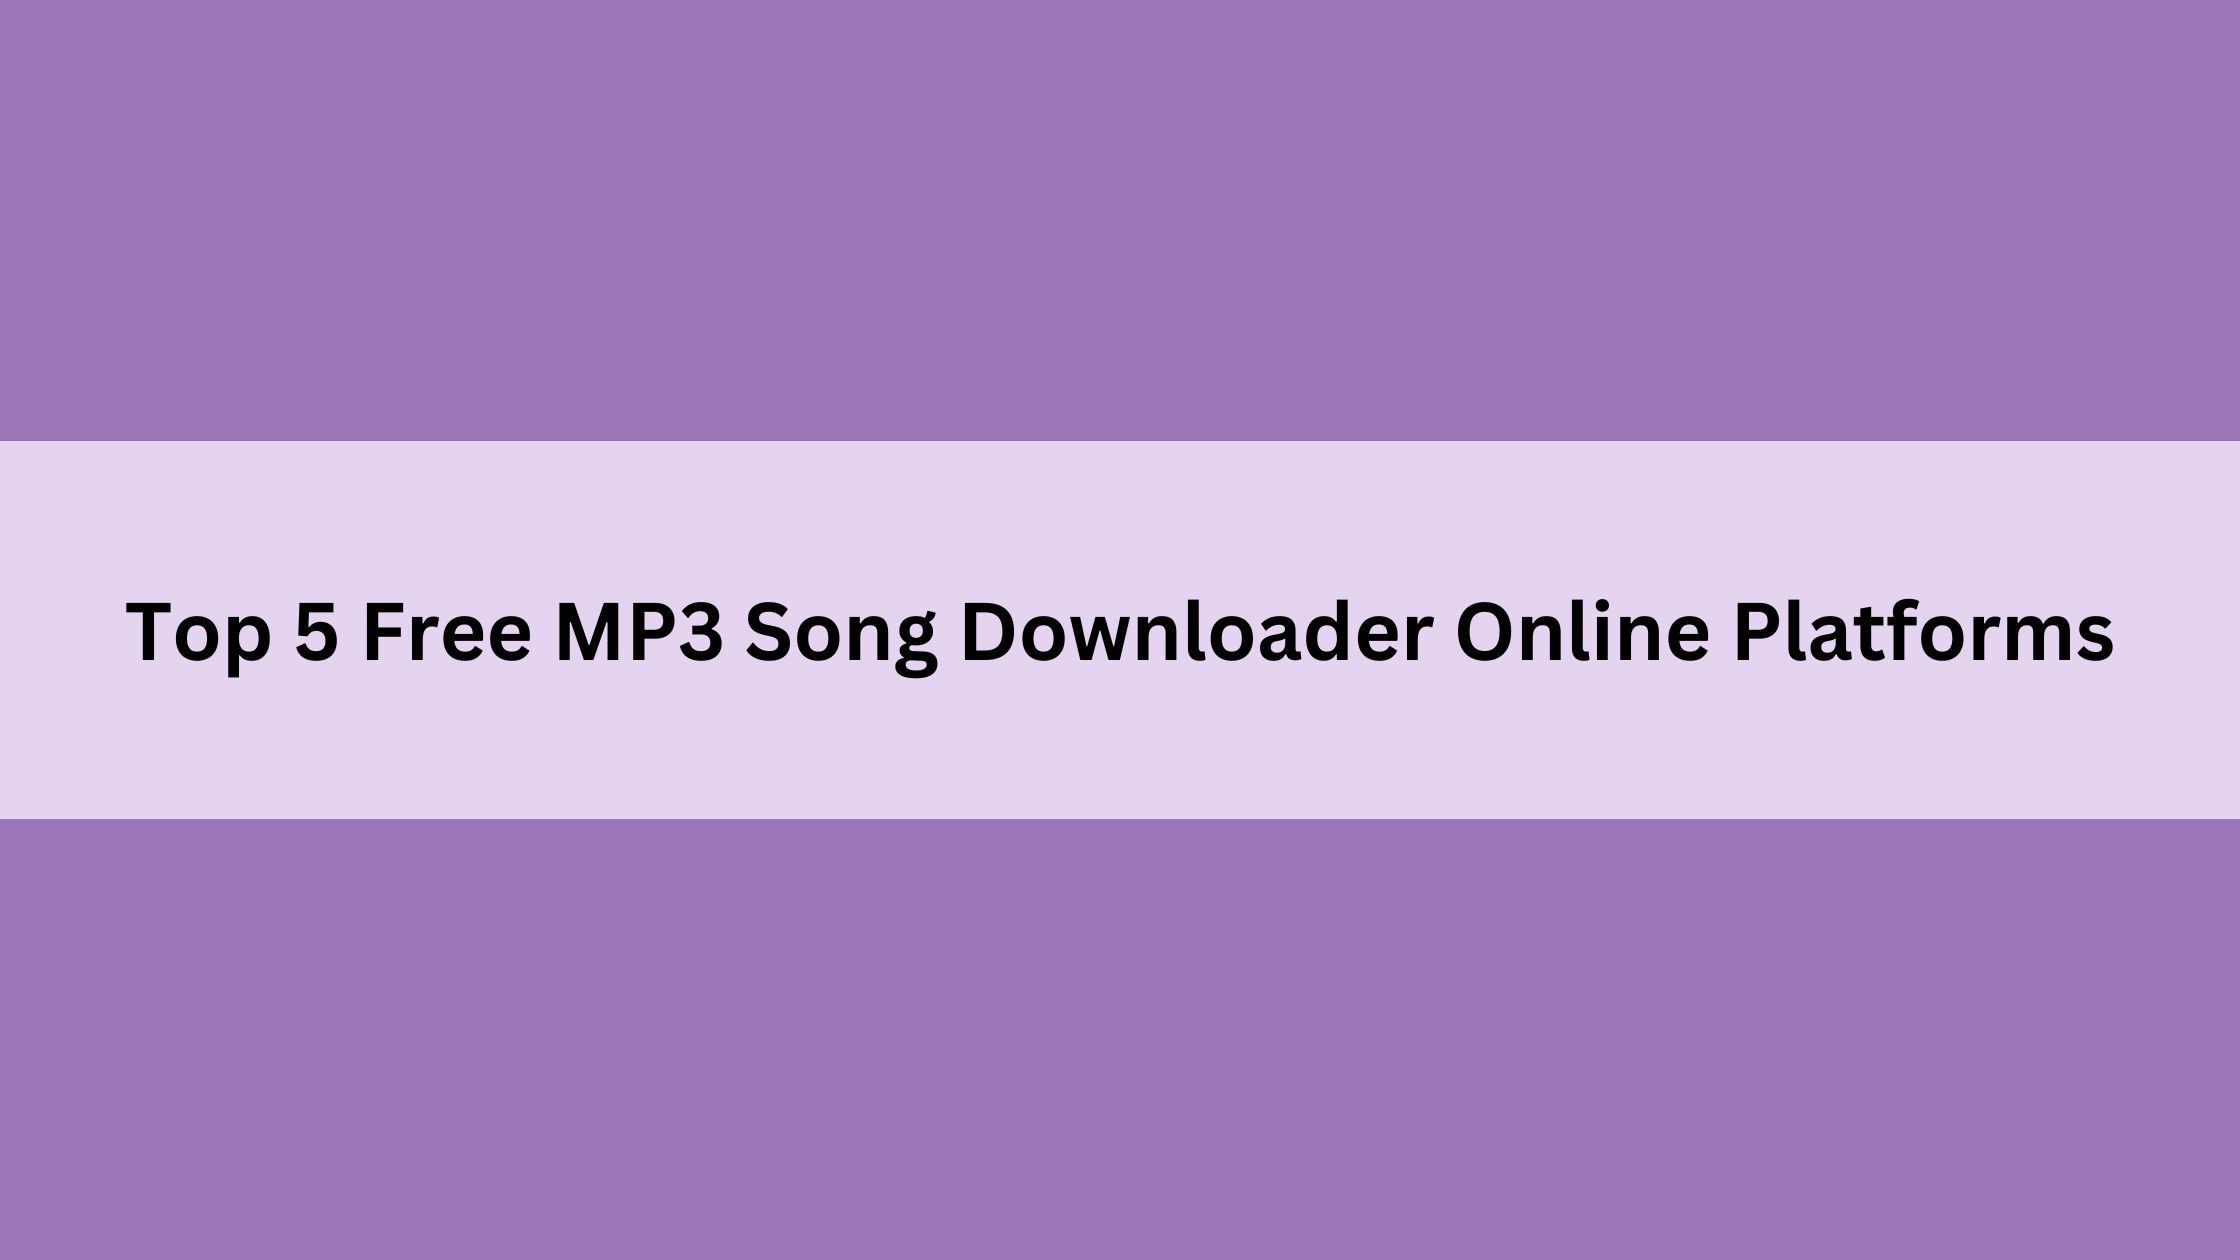 Free MP3 Song Downloader